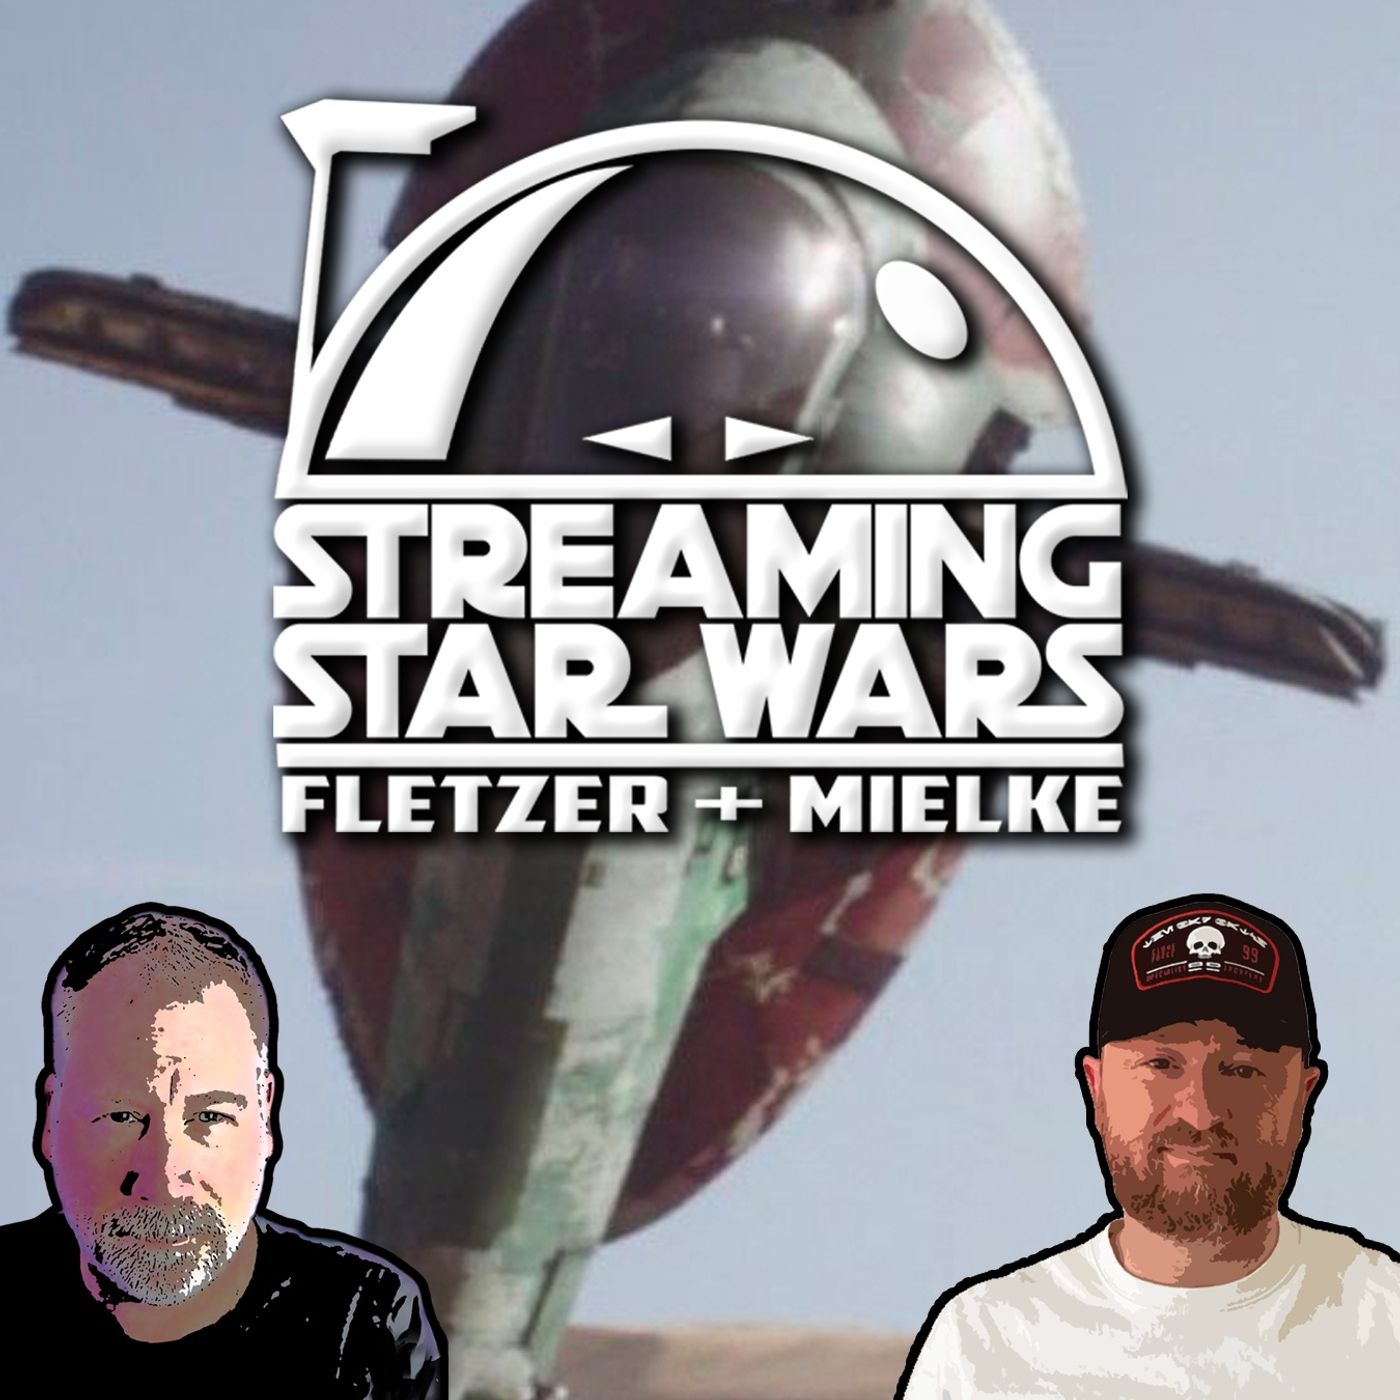 Streaming Star Wars - Do We Really Care what Boba Fett's Ship is Called?